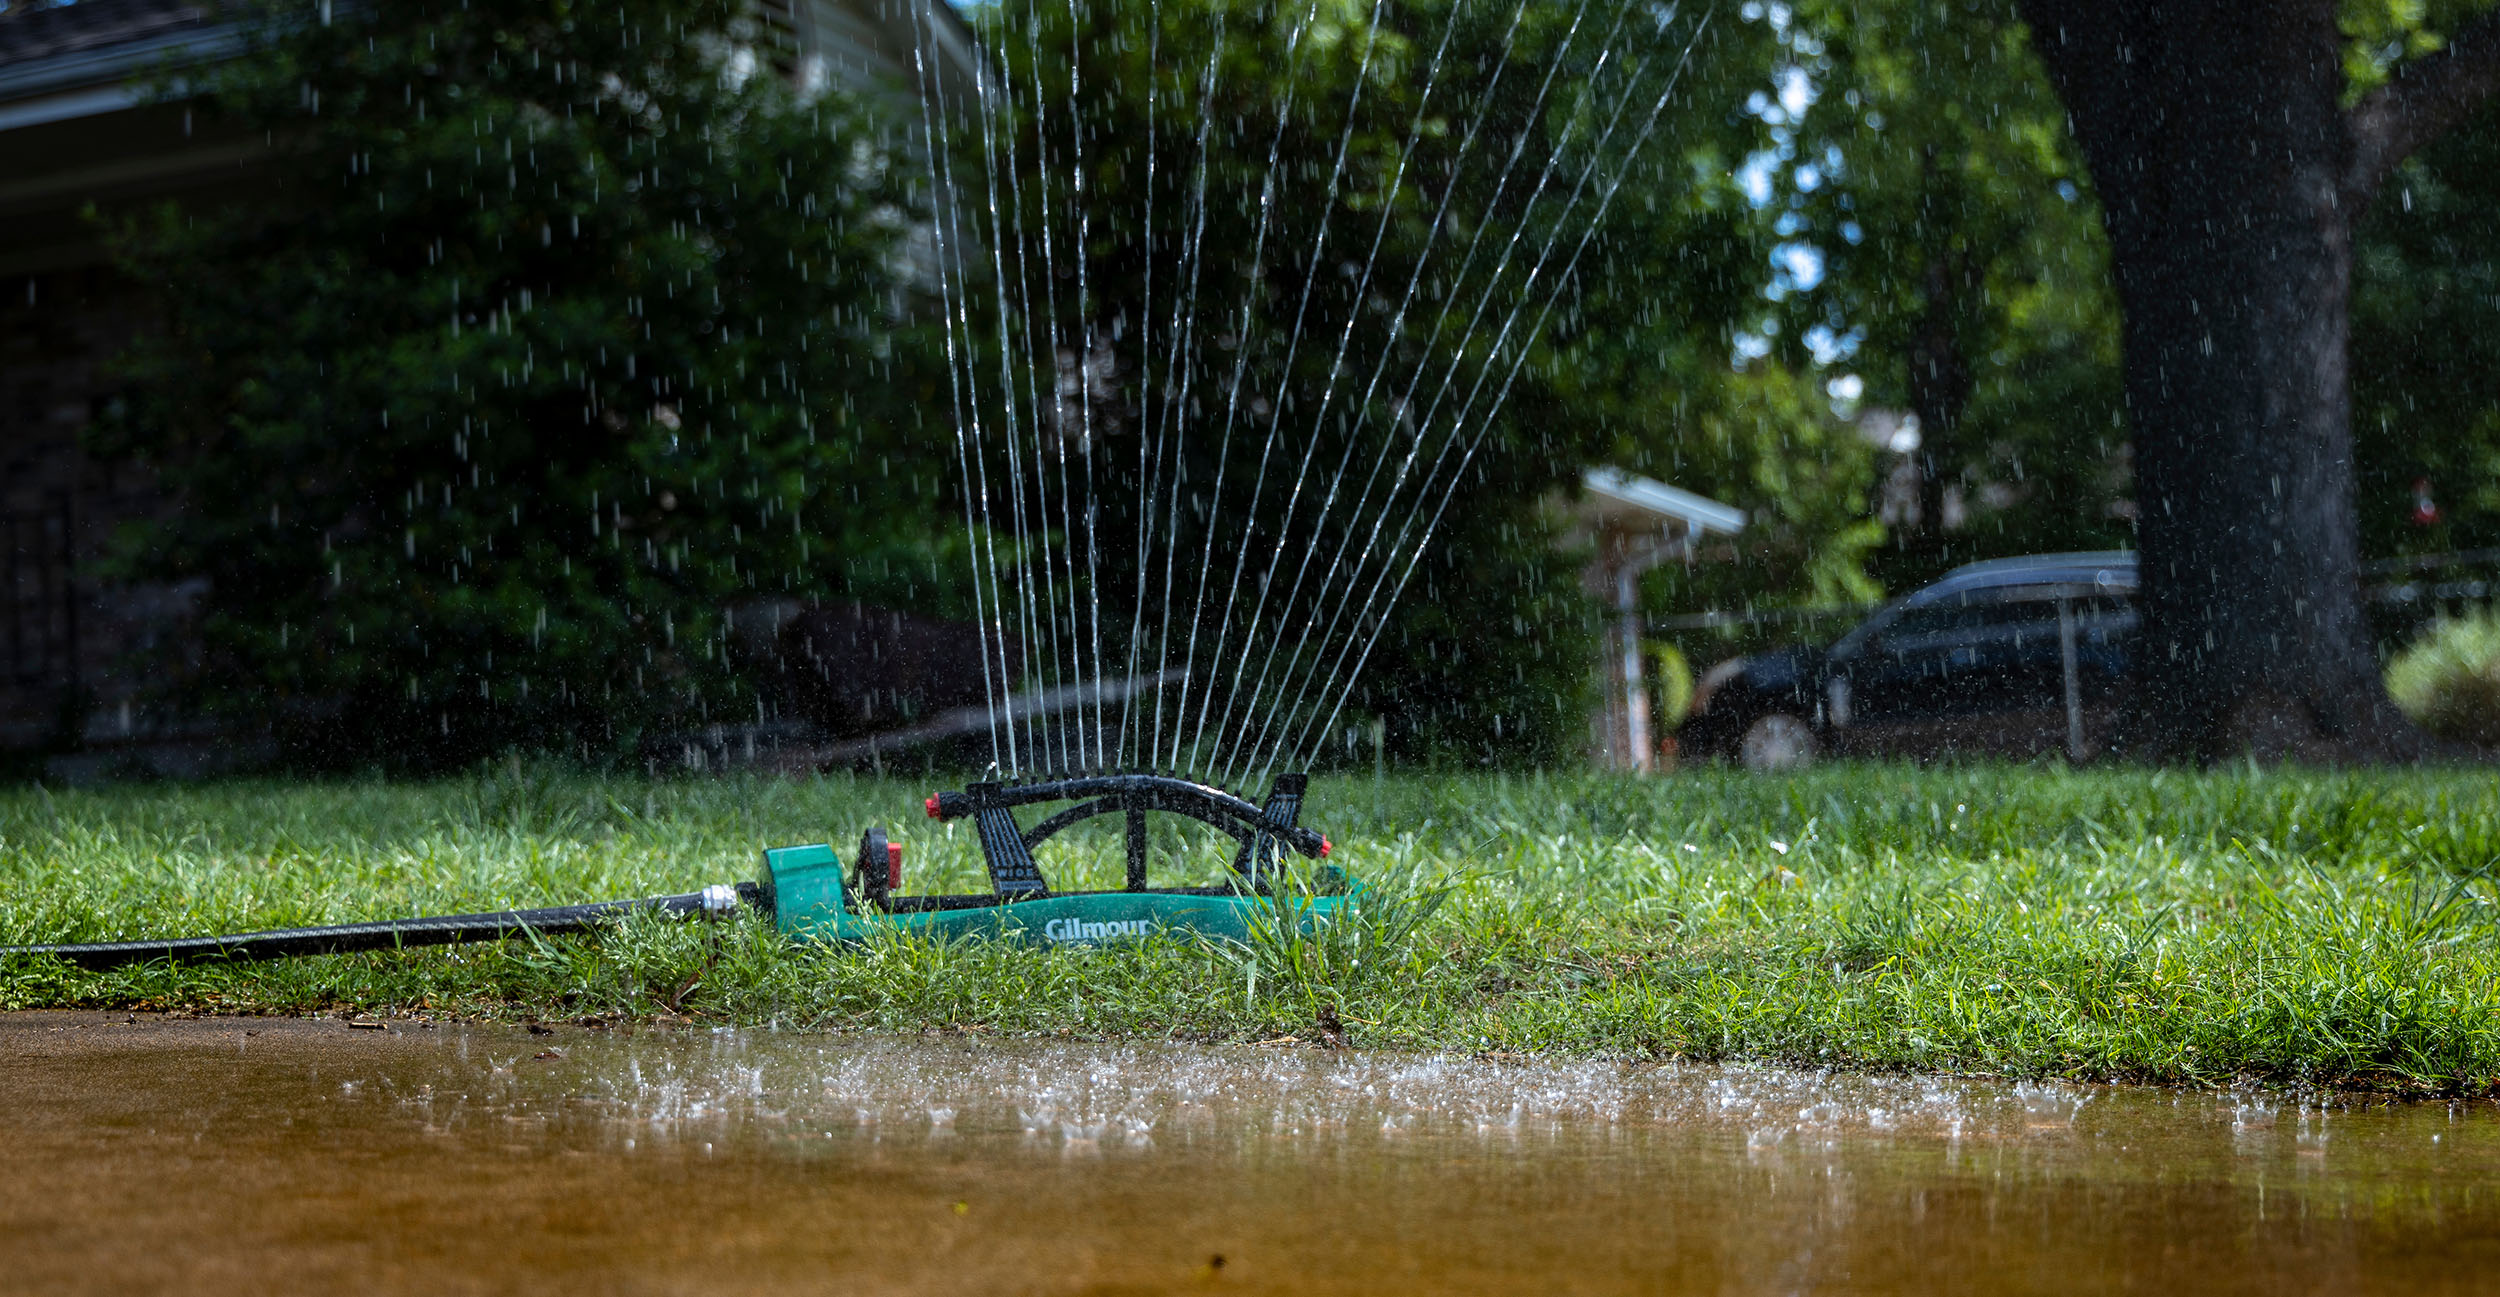 Landscaping tips to conserve water